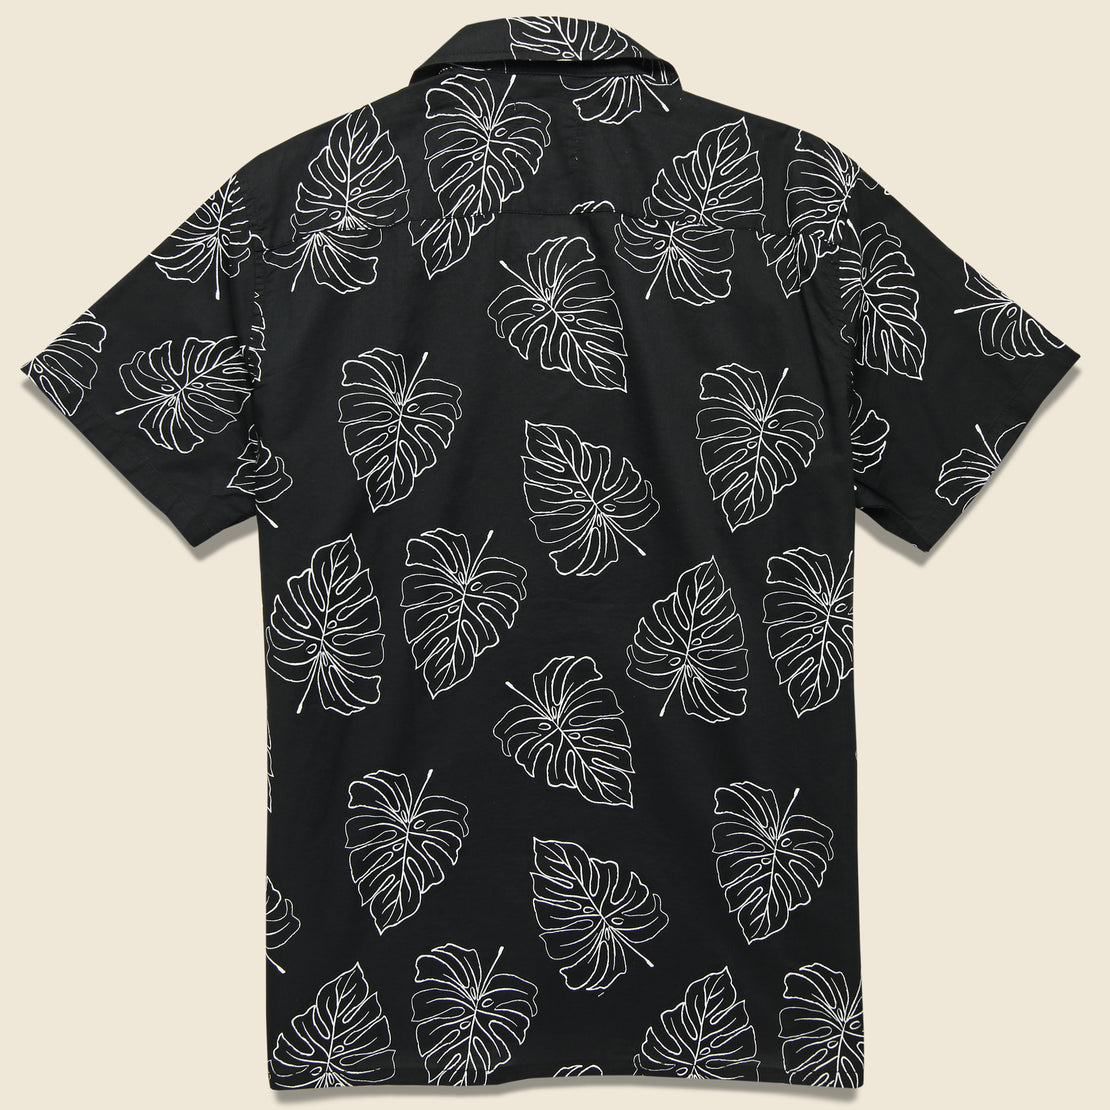 Monstera Leaf Shirt - Black - Life After Denim - STAG Provisions - Tops - S/S Woven - Floral